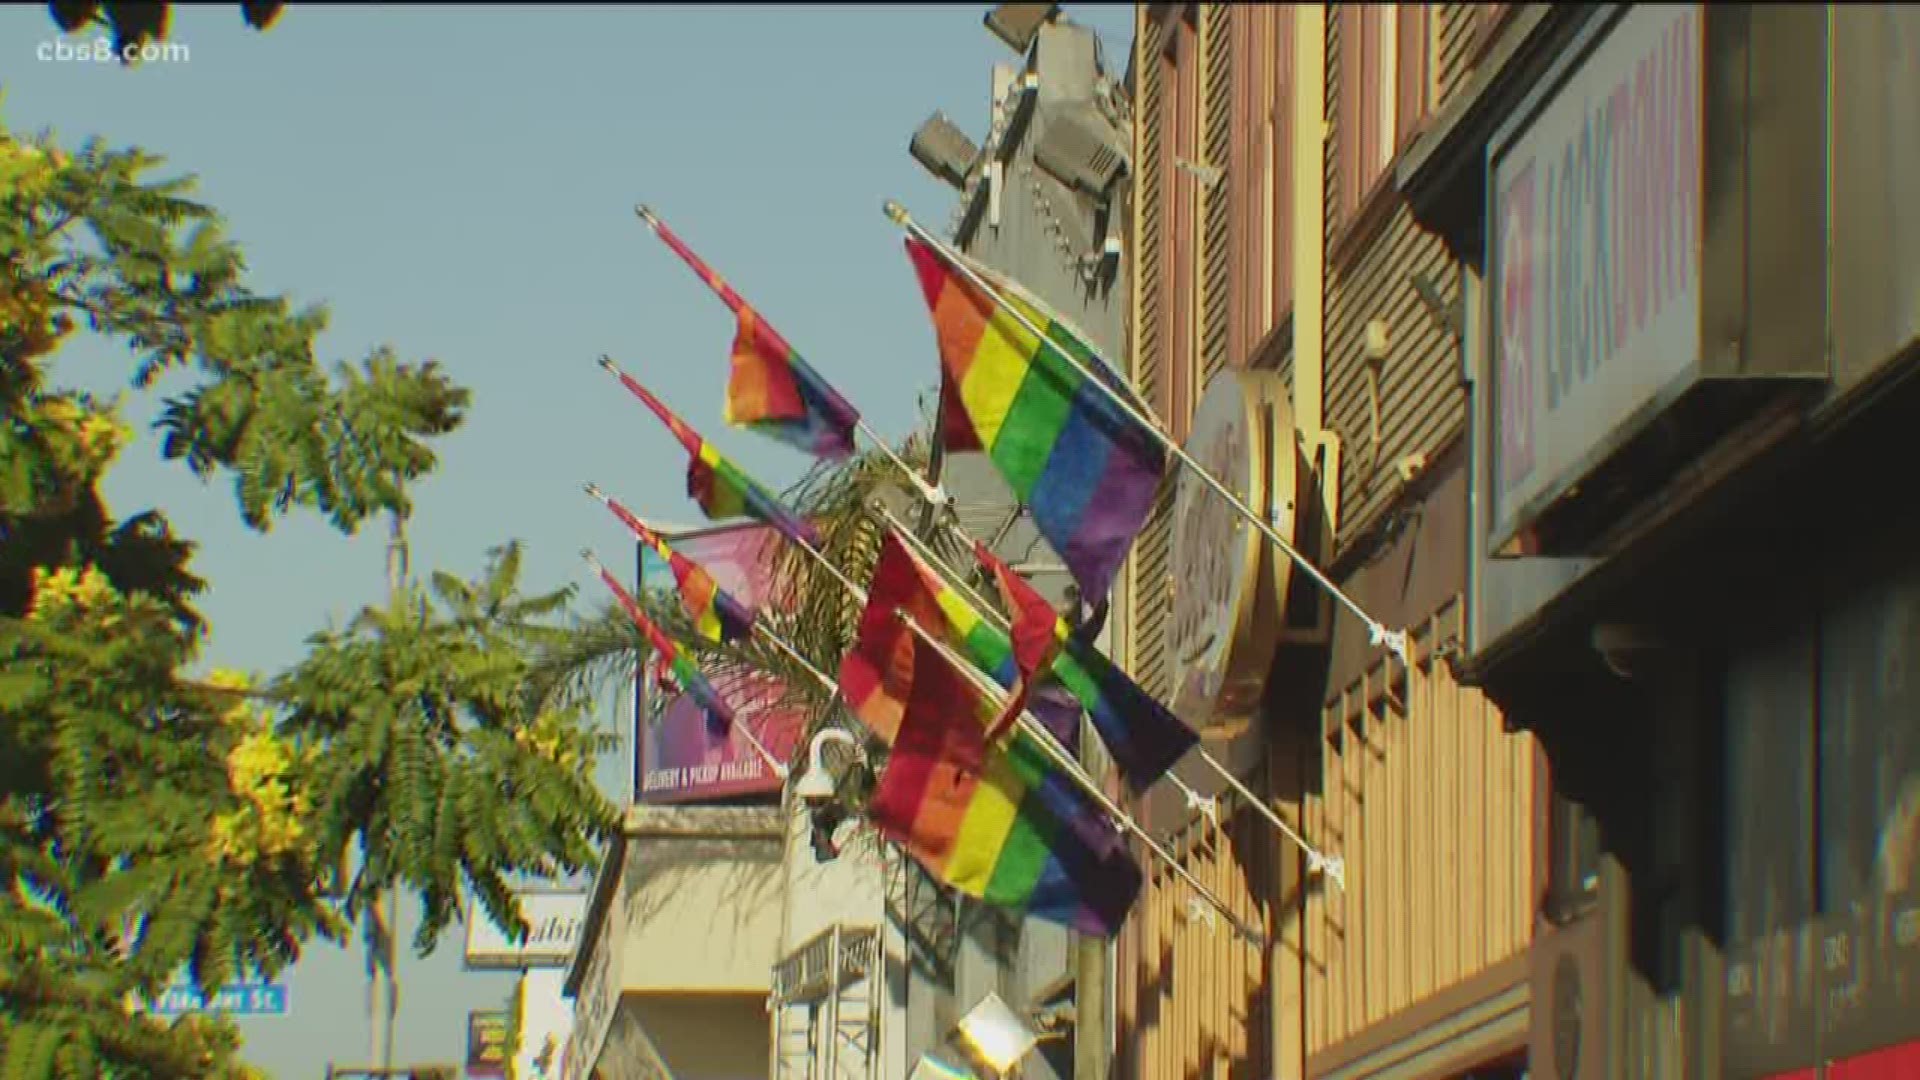 This week and weekend, San Diego is celebrating Pride. On Tuesday, Tacos Libertad in Hillcrest kicked off its monthly charity – hoping to raise $10,000 for Rady Children’s Hospital’s Center for Gender Affirming Care.